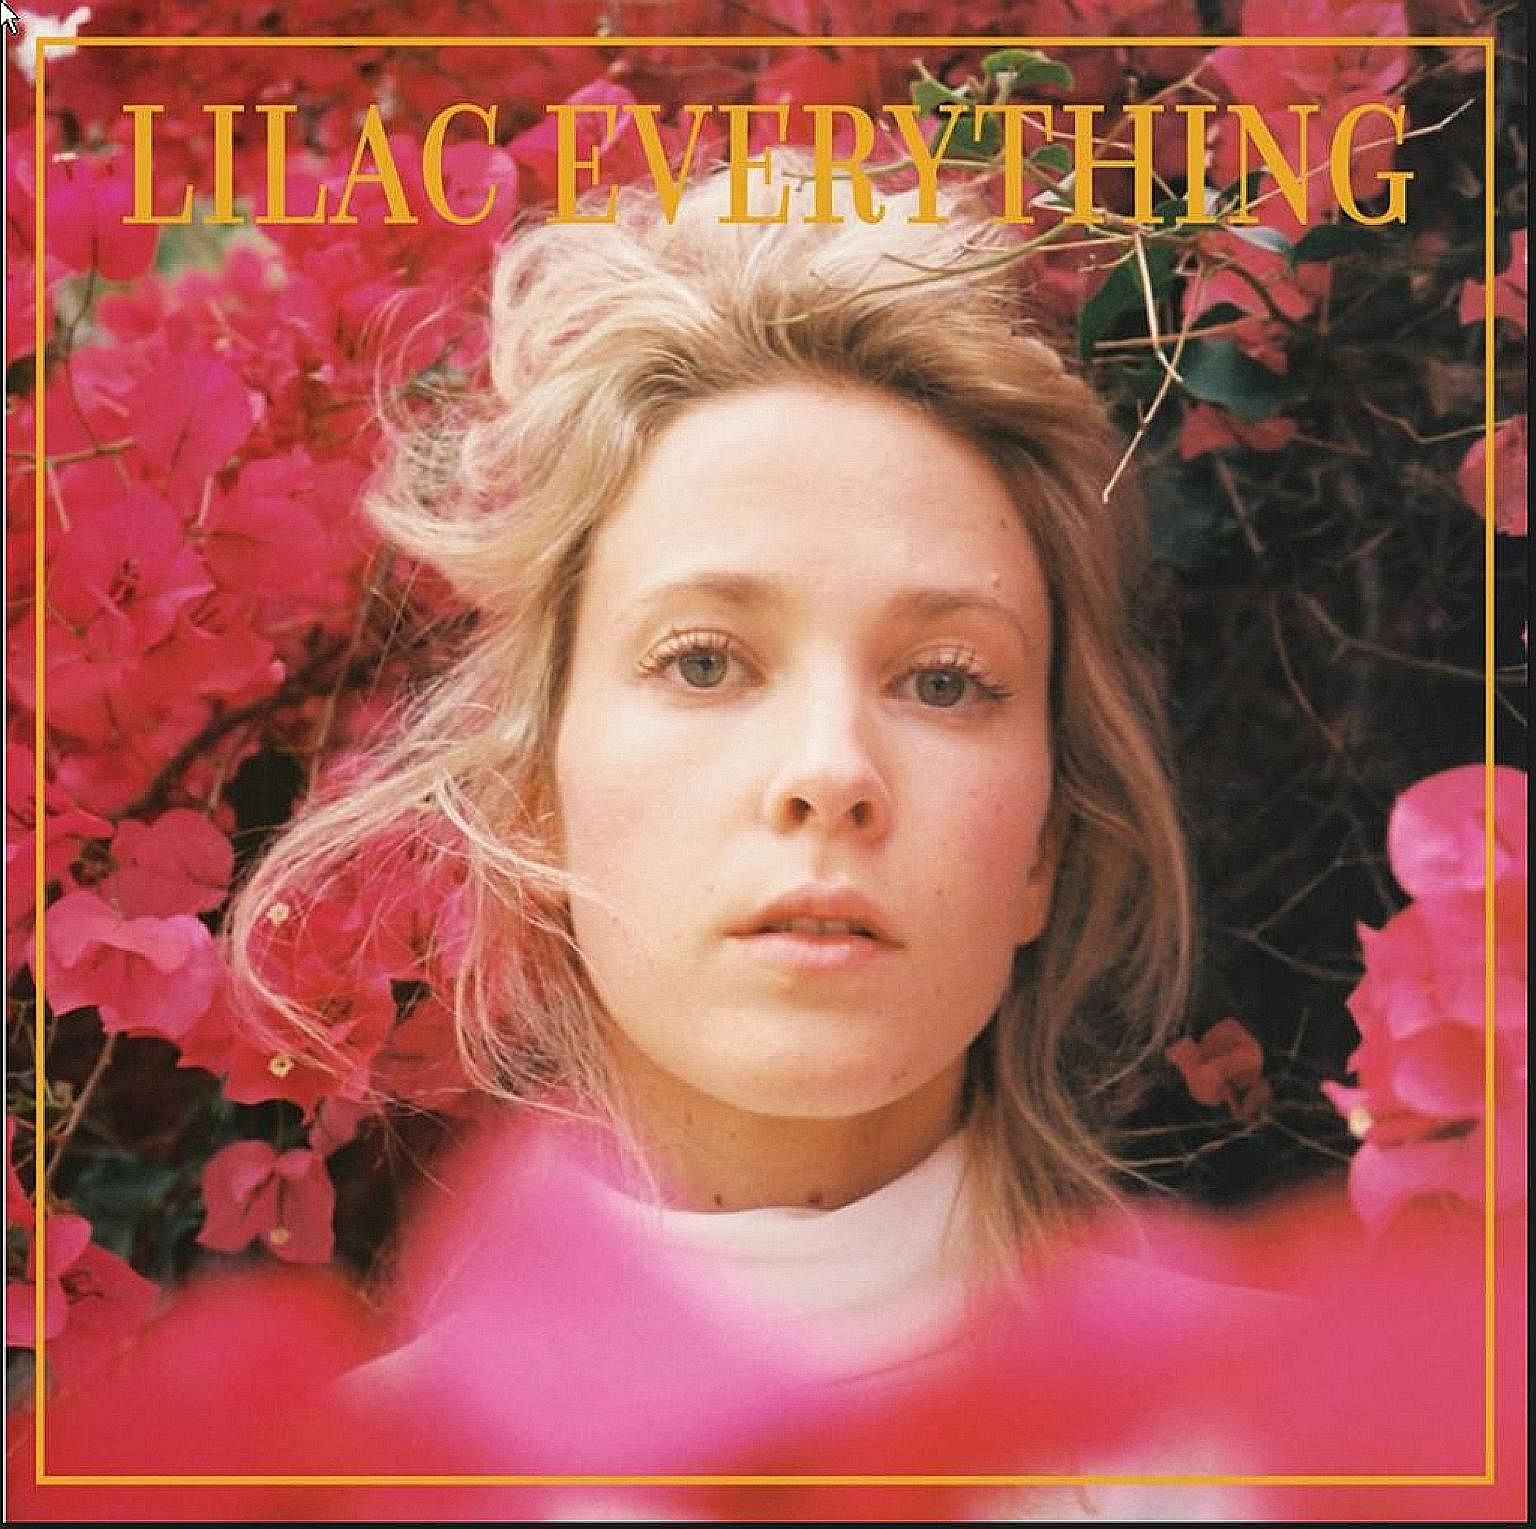 Emma Louise pitched her voice lower for her third album, Lilac Everything.